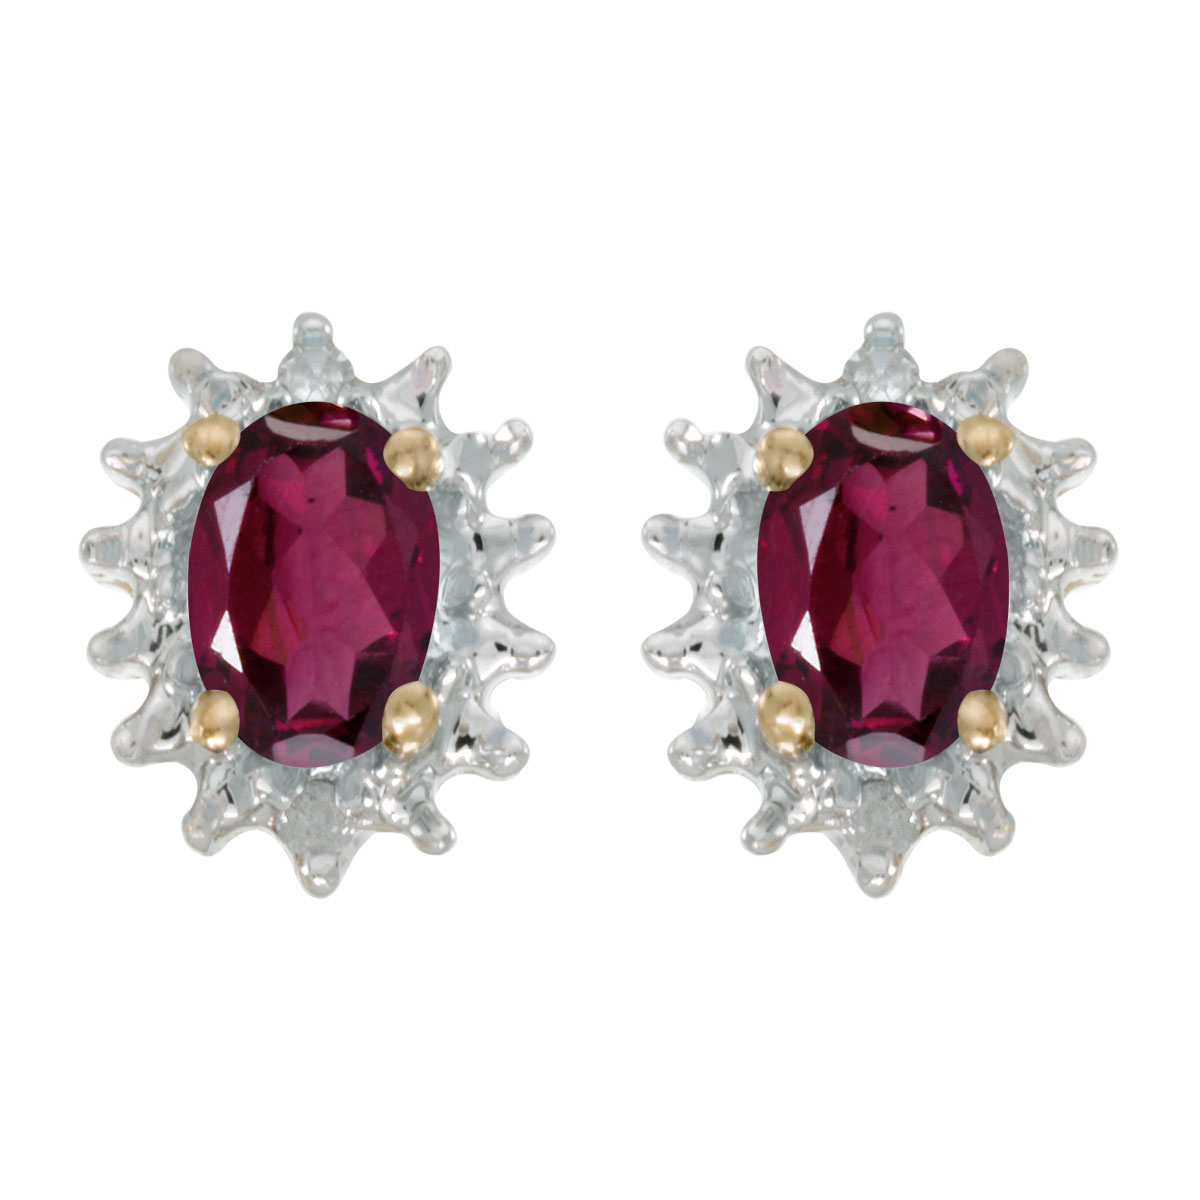 These 14k yellow gold oval rhodolite garnet and diamond earrings feature 6x4 mm genuine natural r...